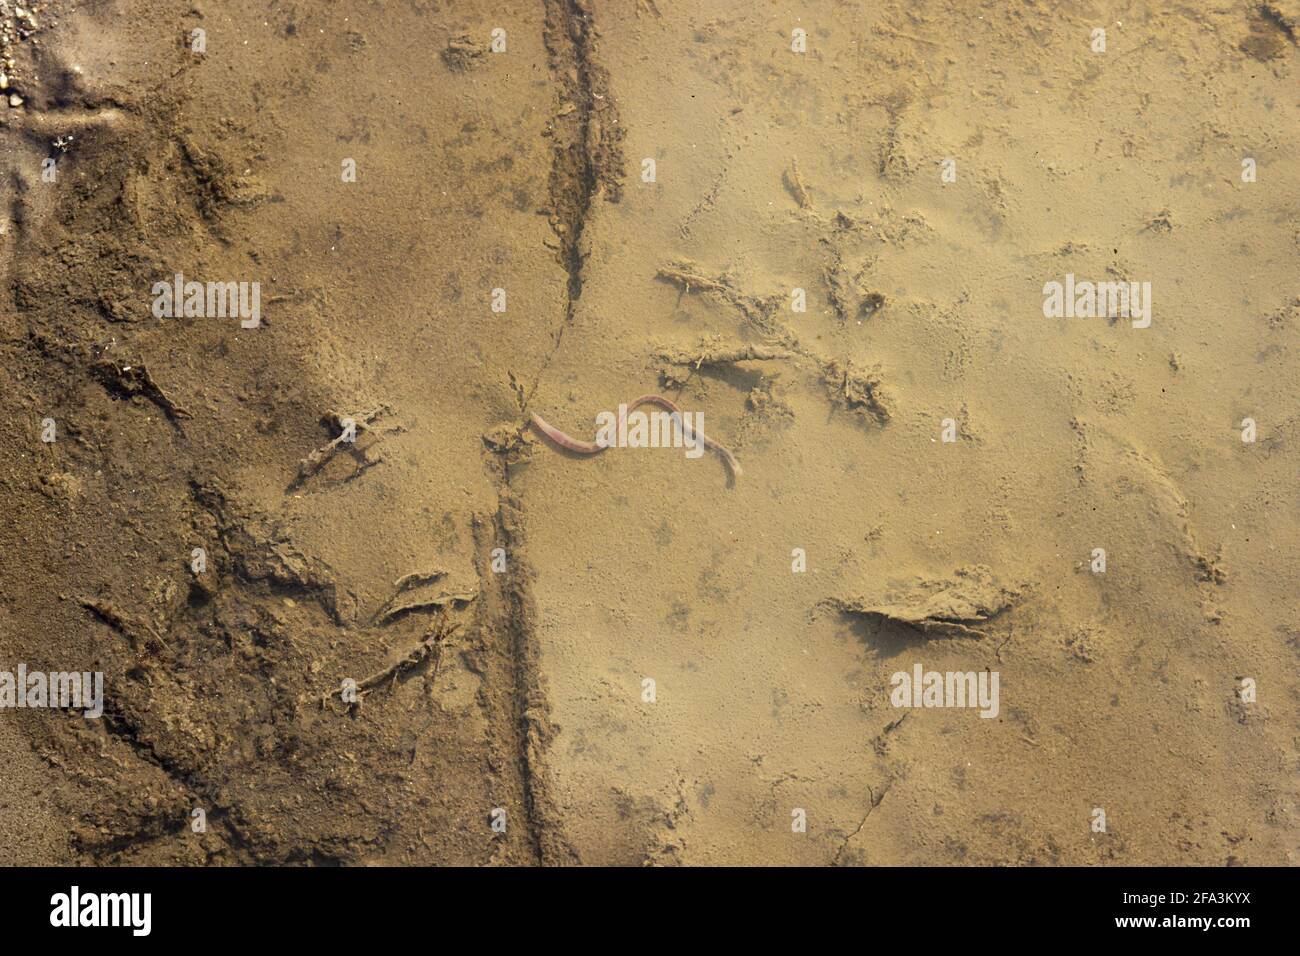 Top view of a long earthworm lies in a rain puddle Stock Photo